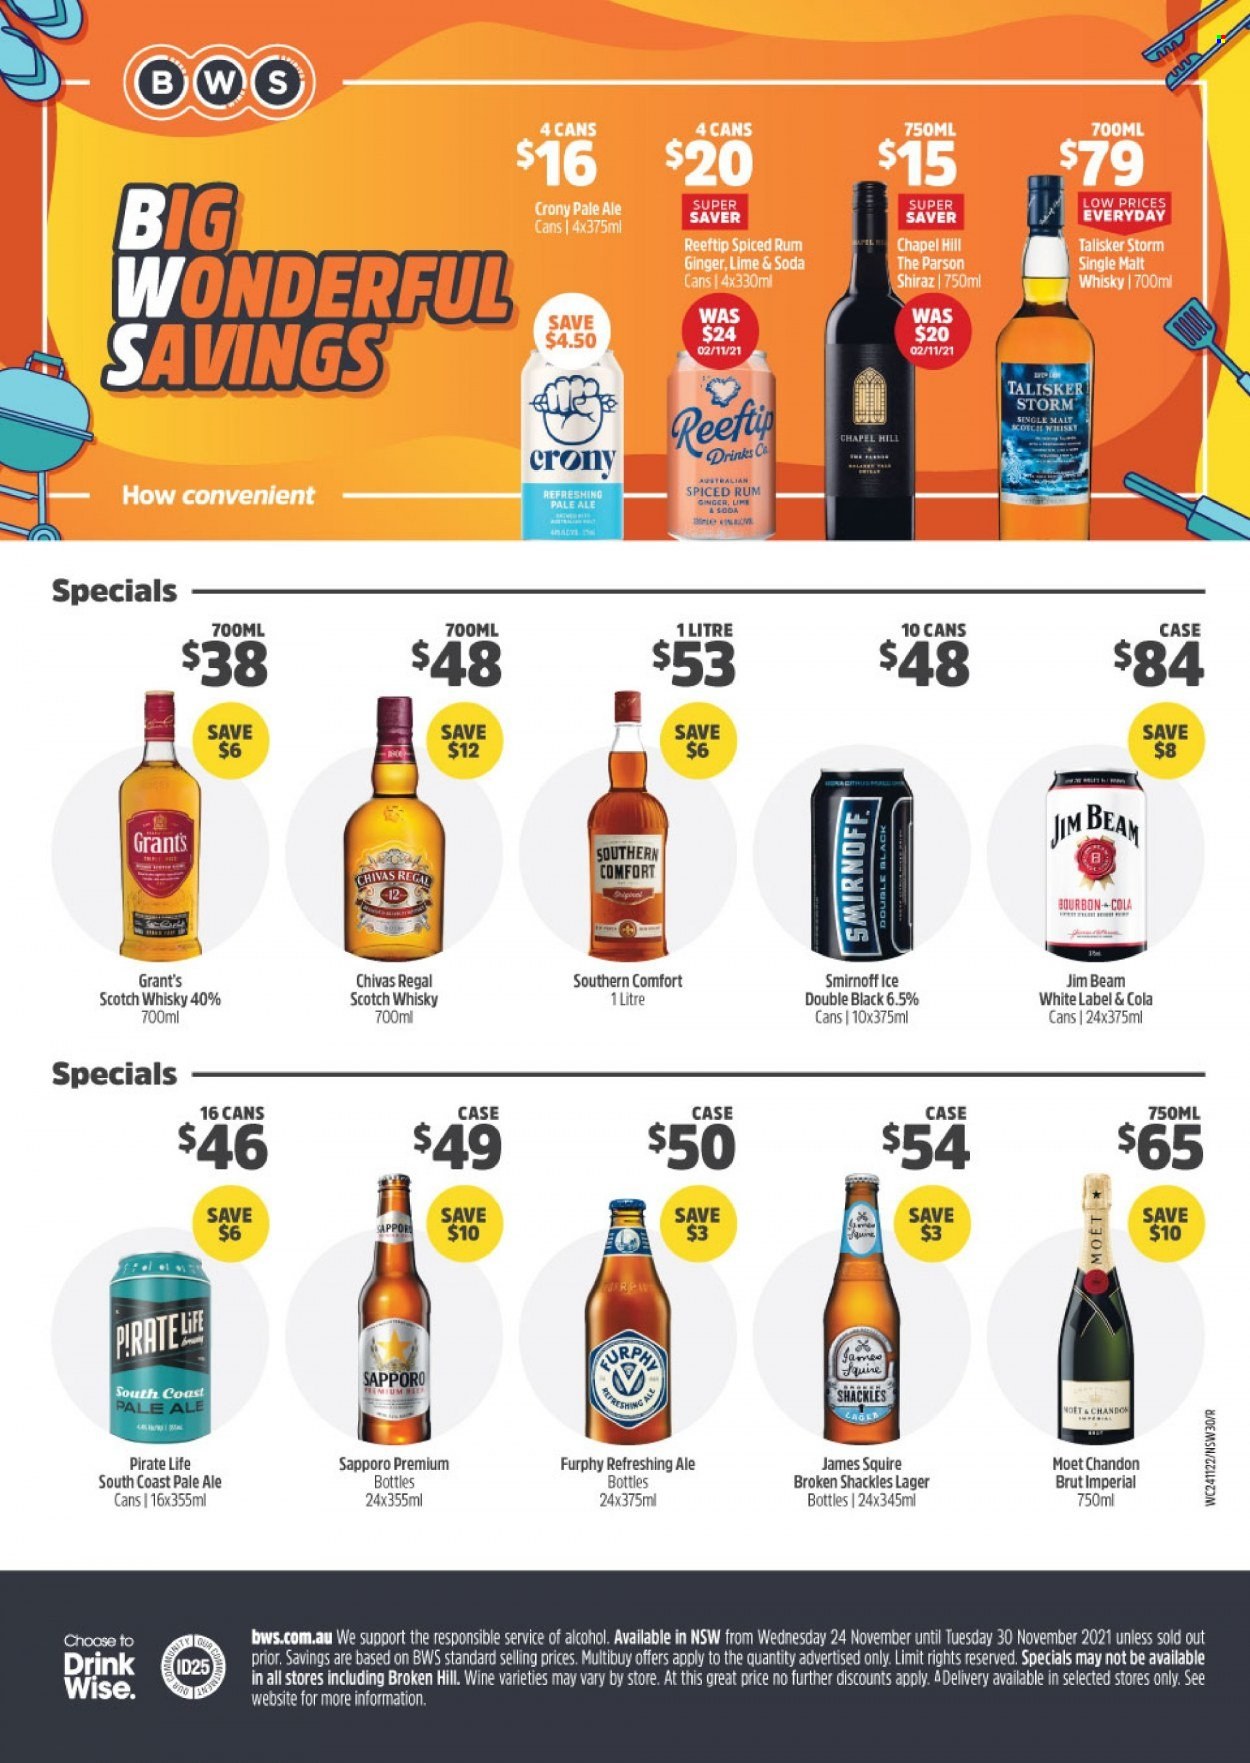 thumbnail - BWS Catalogue - 24 Nov 2021 - 30 Nov 2021 - Sales products - soda, red wine, wine, Moët & Chandon, Shiraz, bourbon, rum, Smirnoff, spiced rum, Grant's, Chivas Regal, Jim Beam, scotch whisky, whisky, beer, Lager. Page 1.